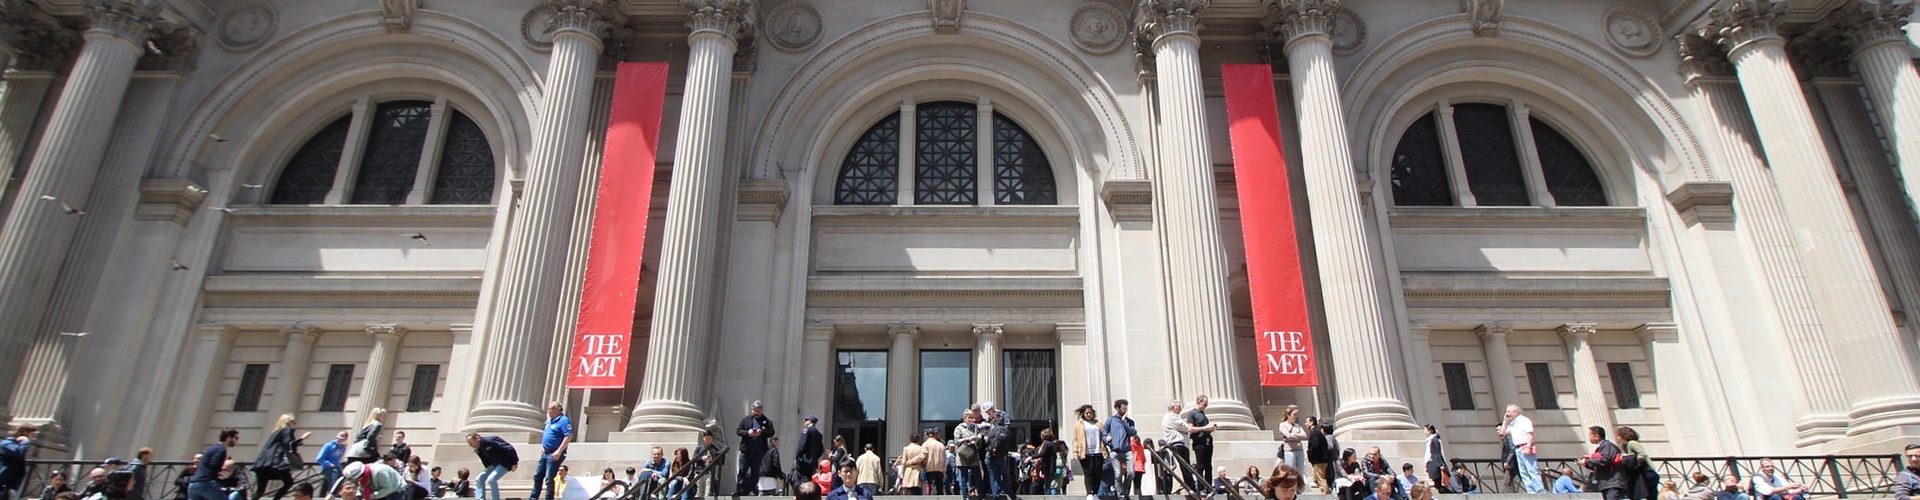 Dixon's Guide to Free Museum Days in NYC